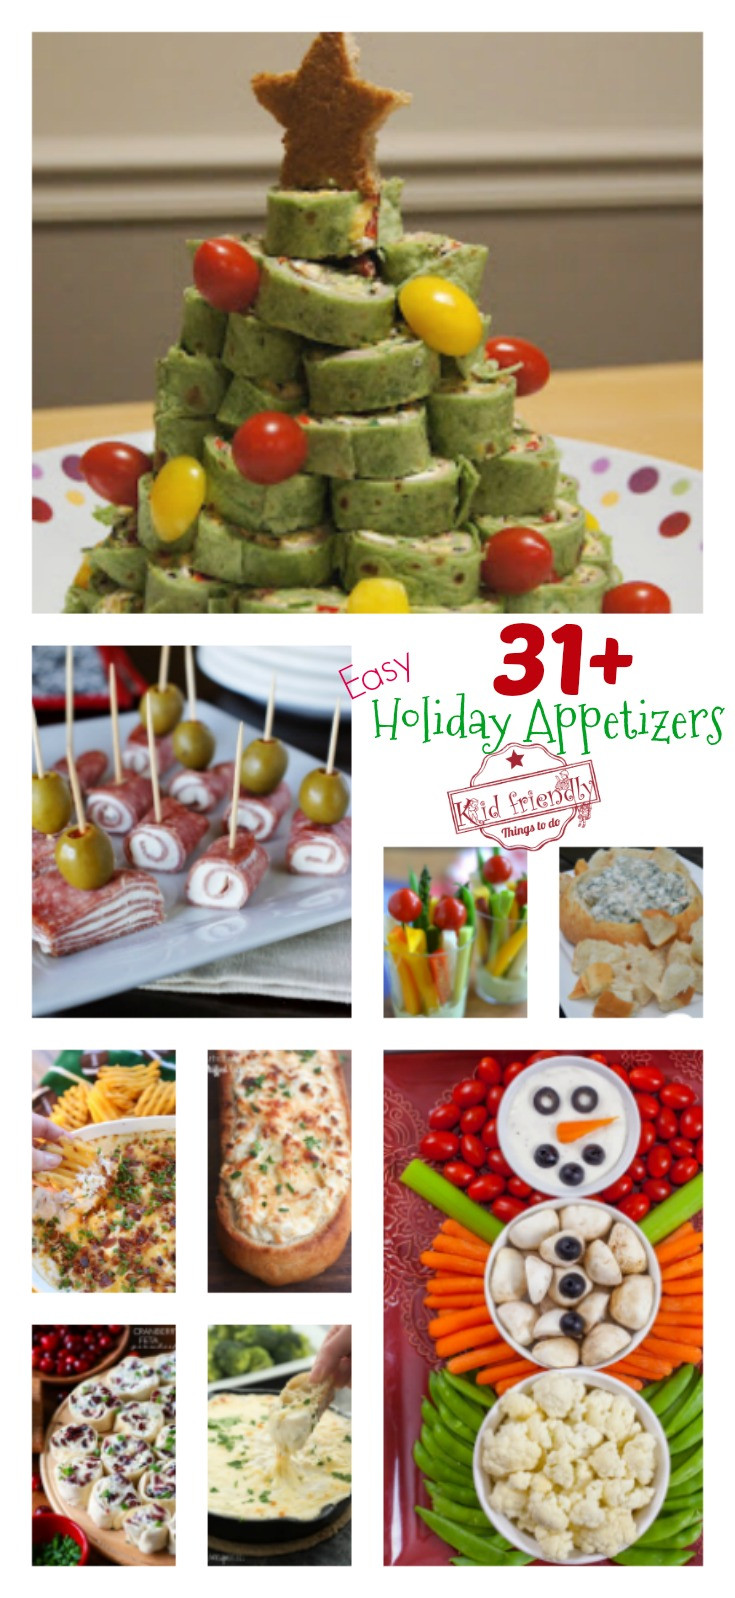 Christmas Party Appetizers
 Over 31 Easy Holiday Appetizers to Make for Christmas New